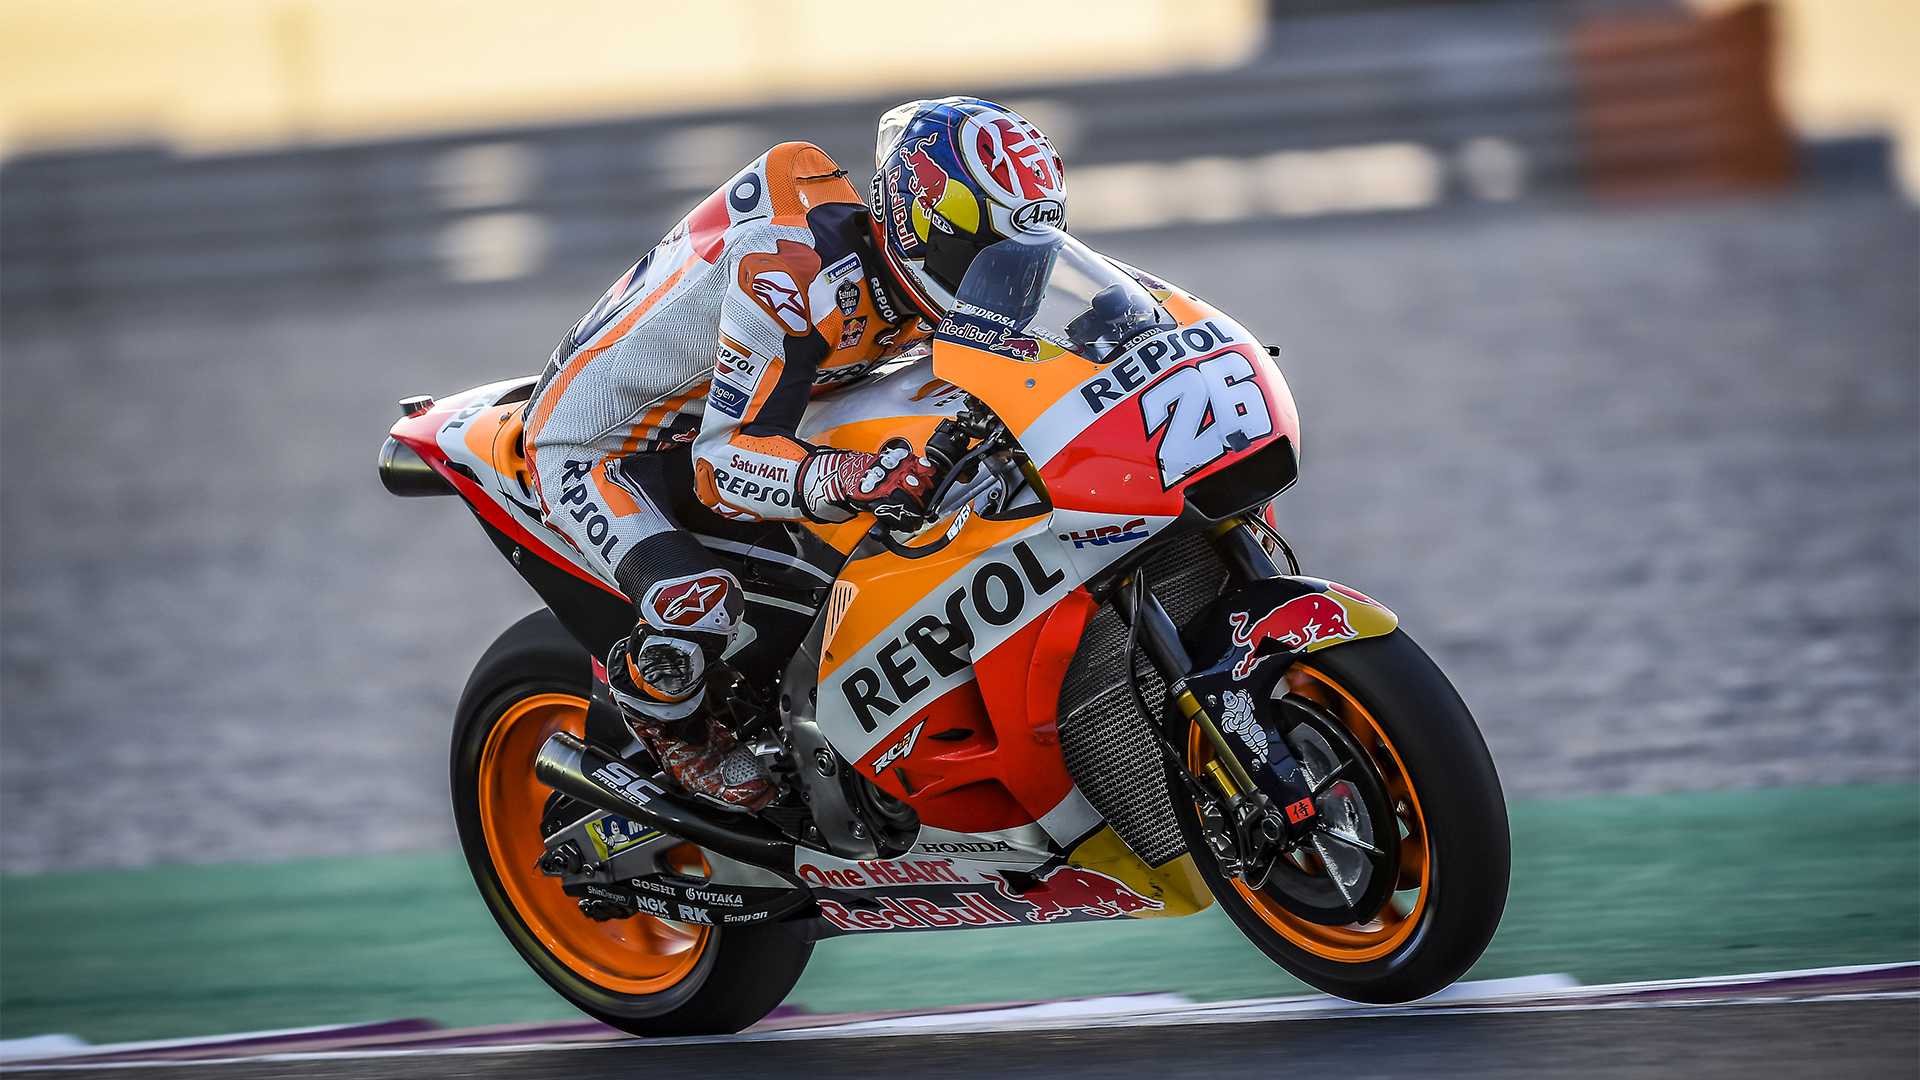 Pedrosa fastest rider at Thailand Official Test - Next stop Lusail